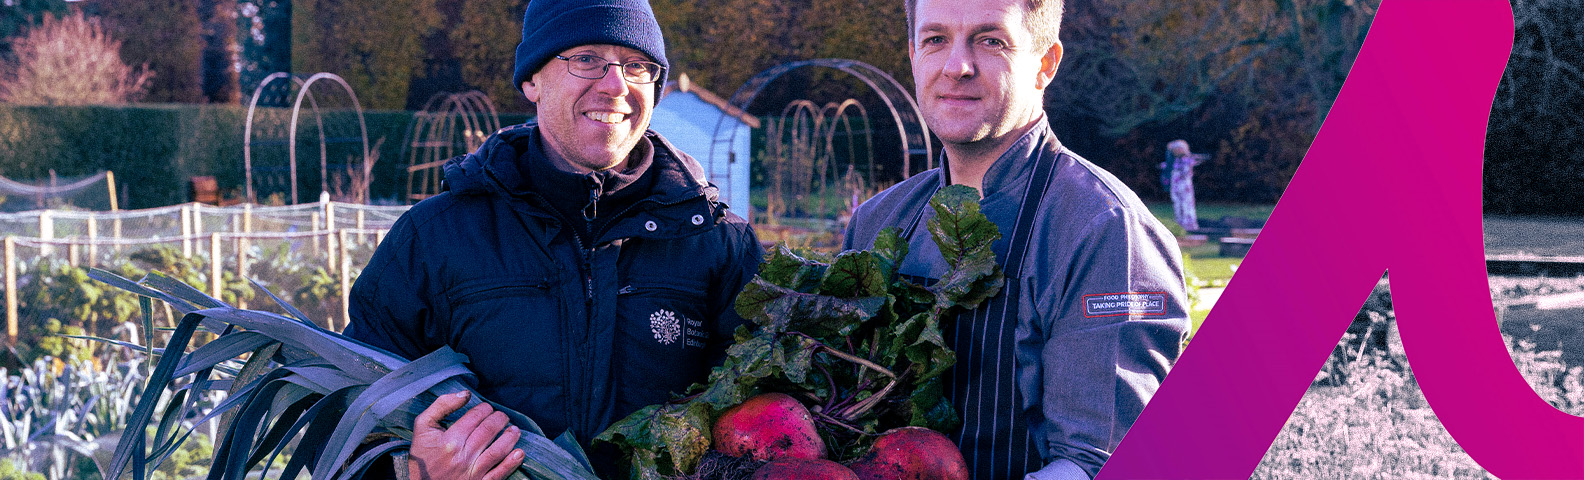 two man holding beets